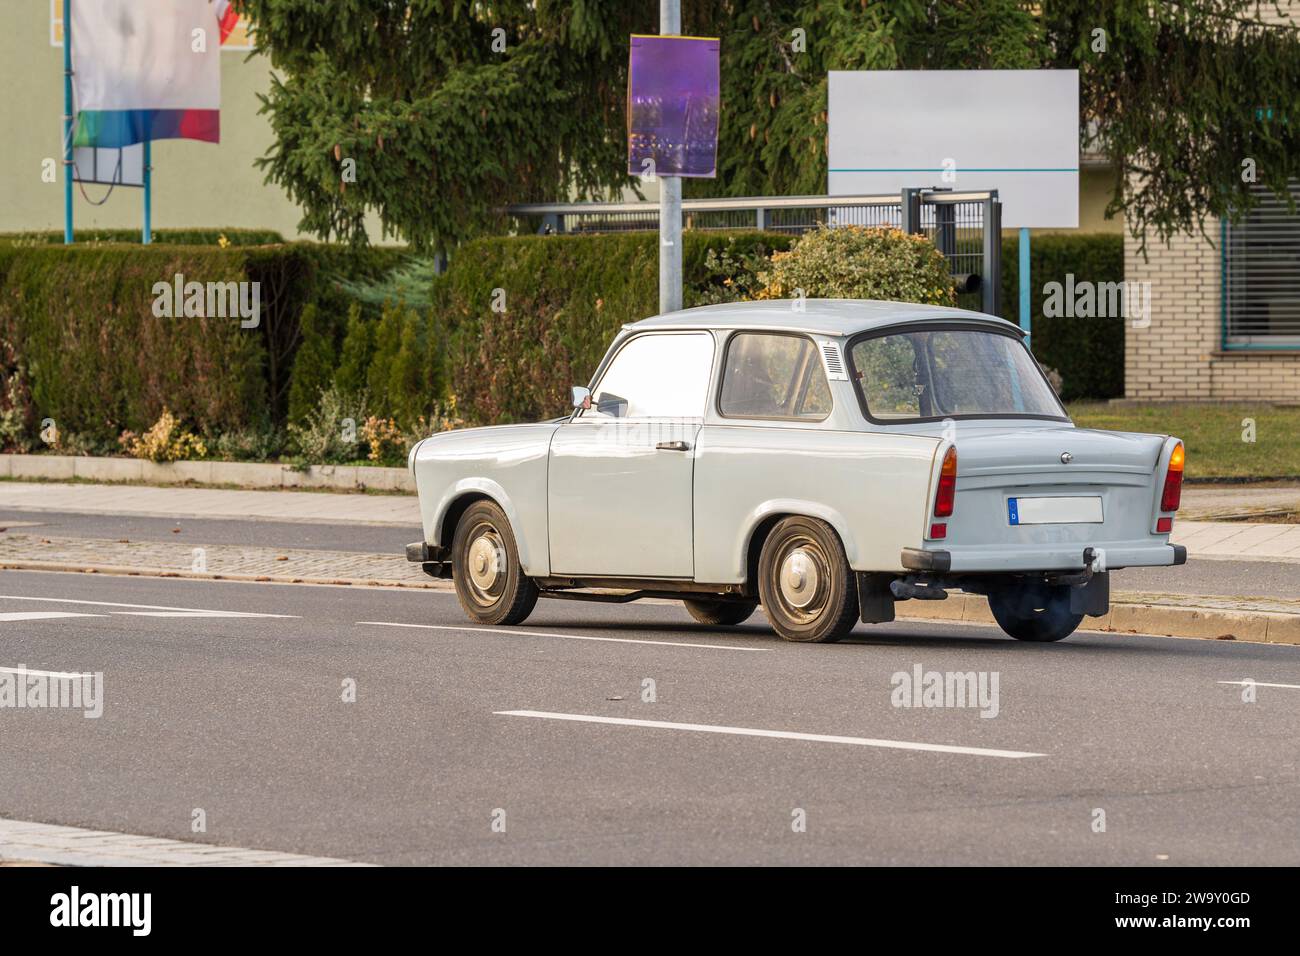 A car from East Germany that was seen in large numbers until 1990 Stock Photo